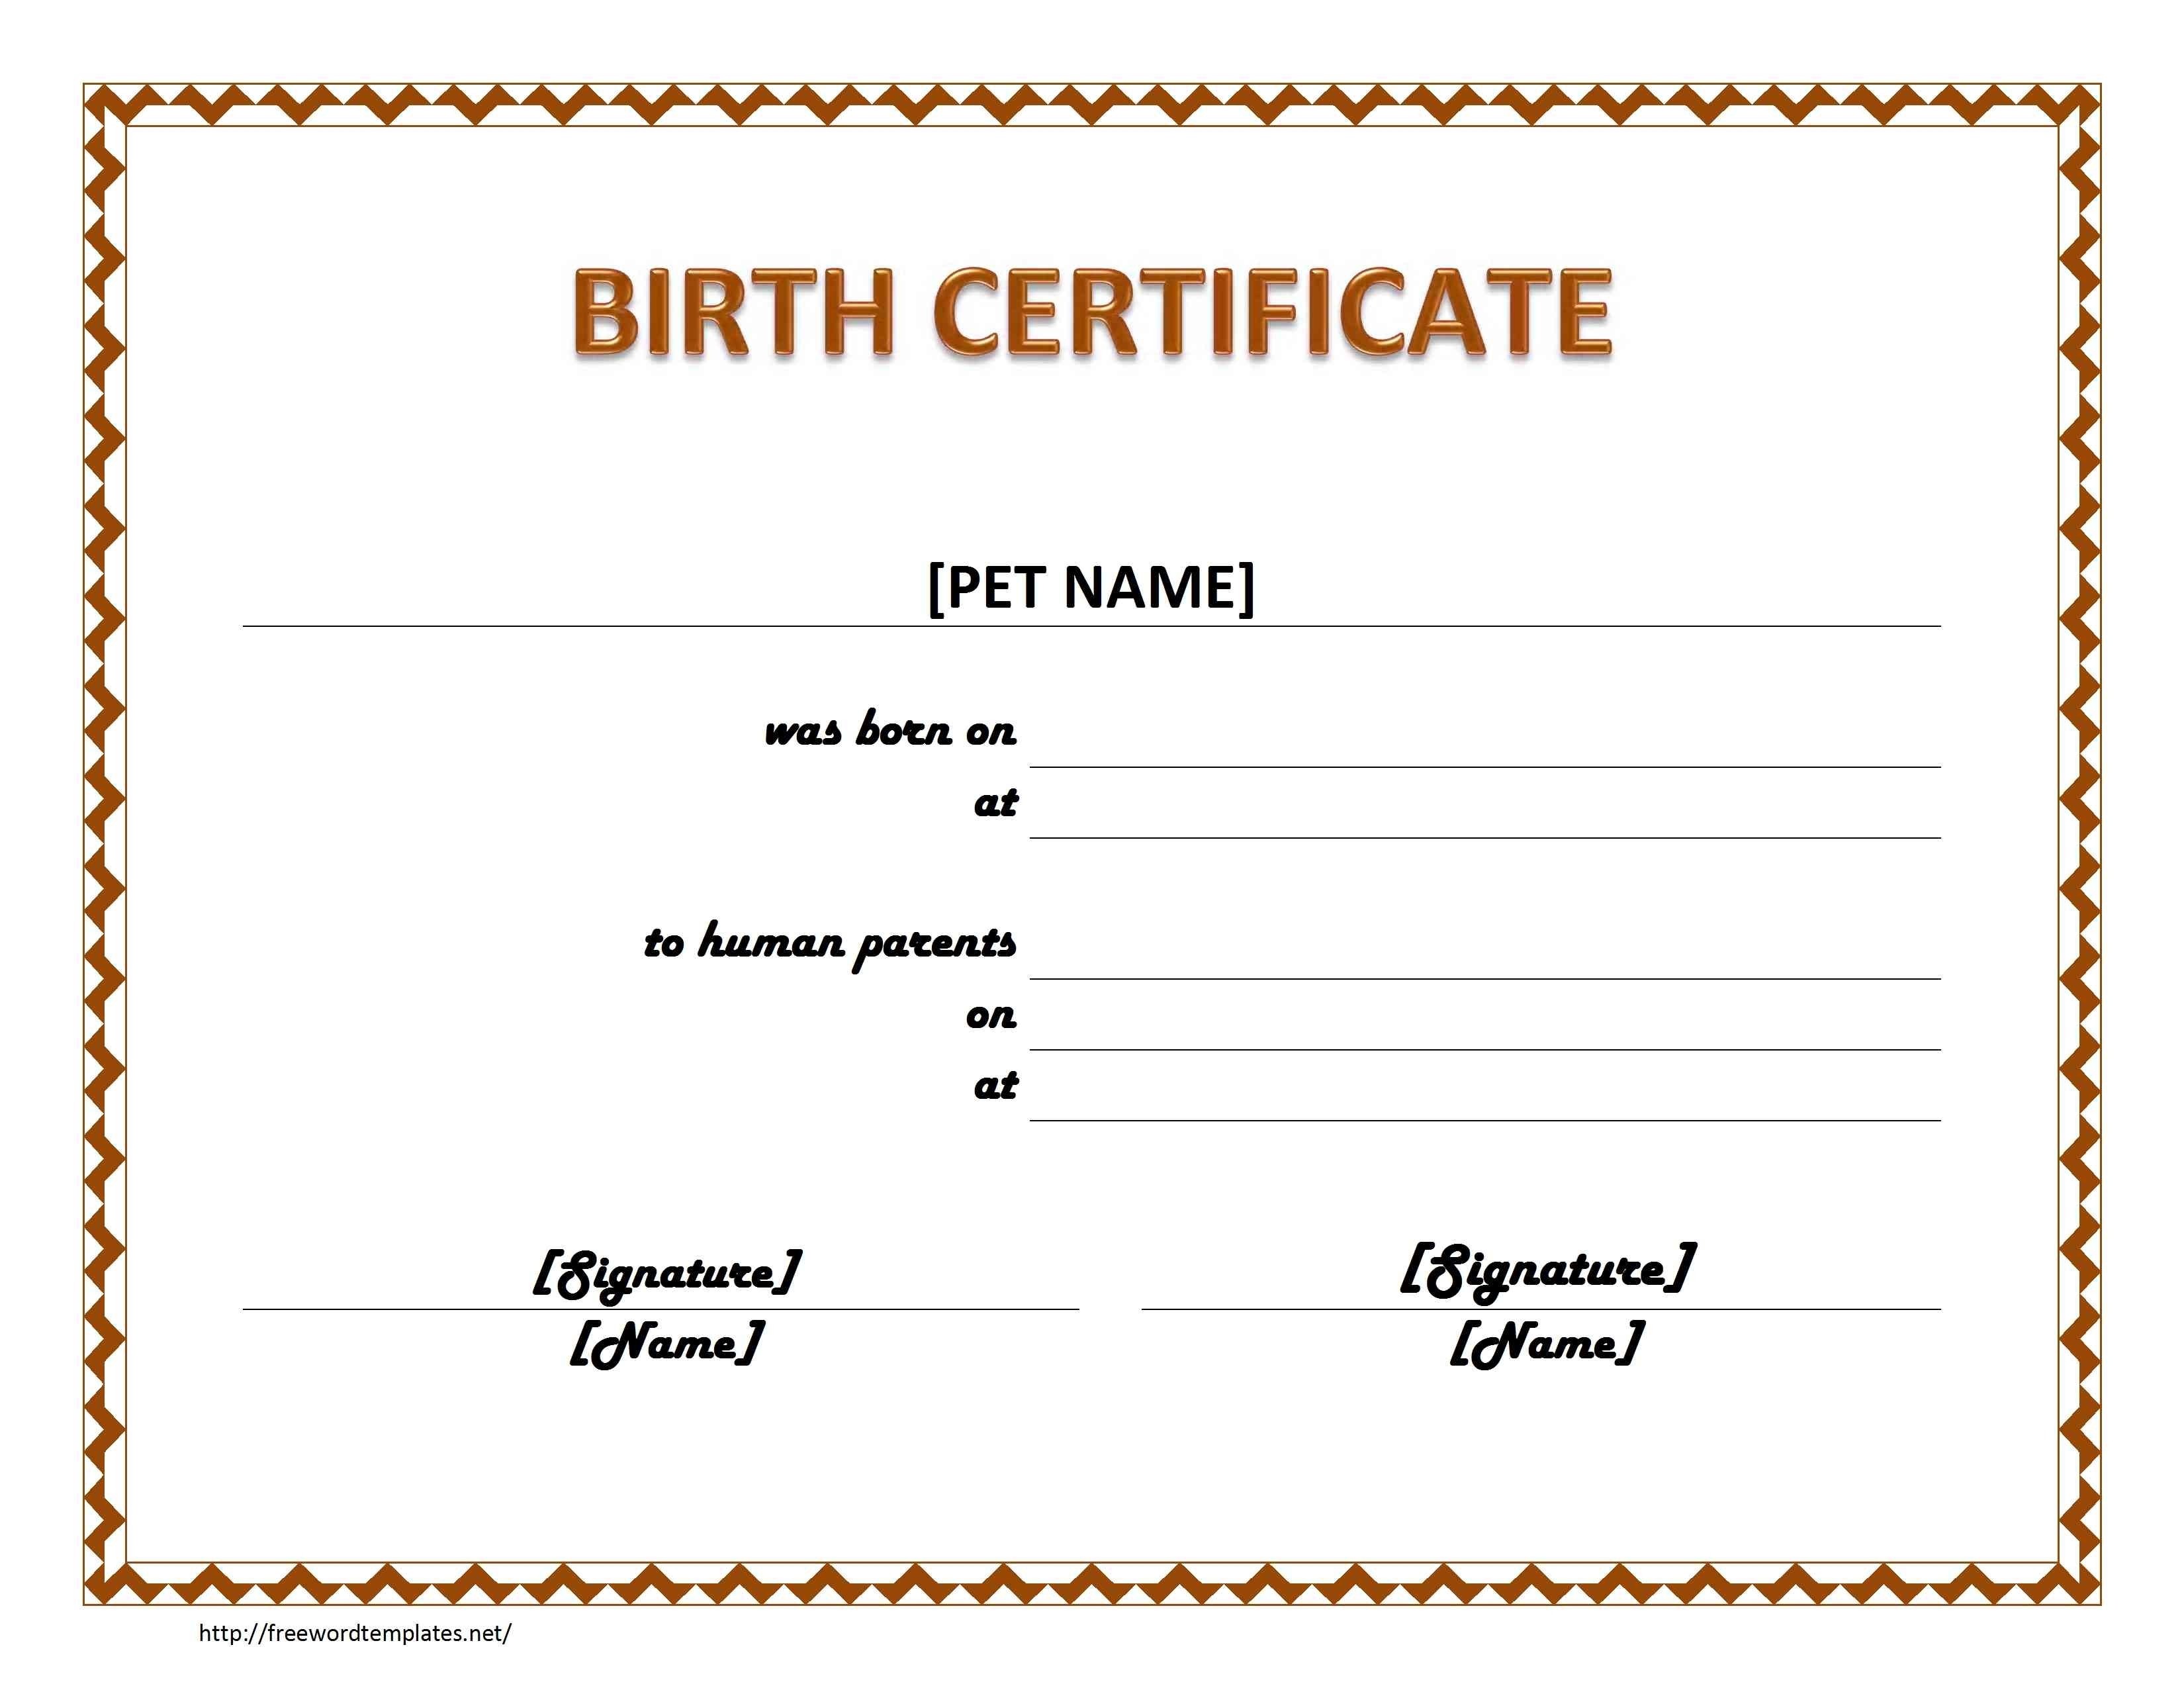 Official Blank Birth Certificate Template Aesthetecurator Com Images